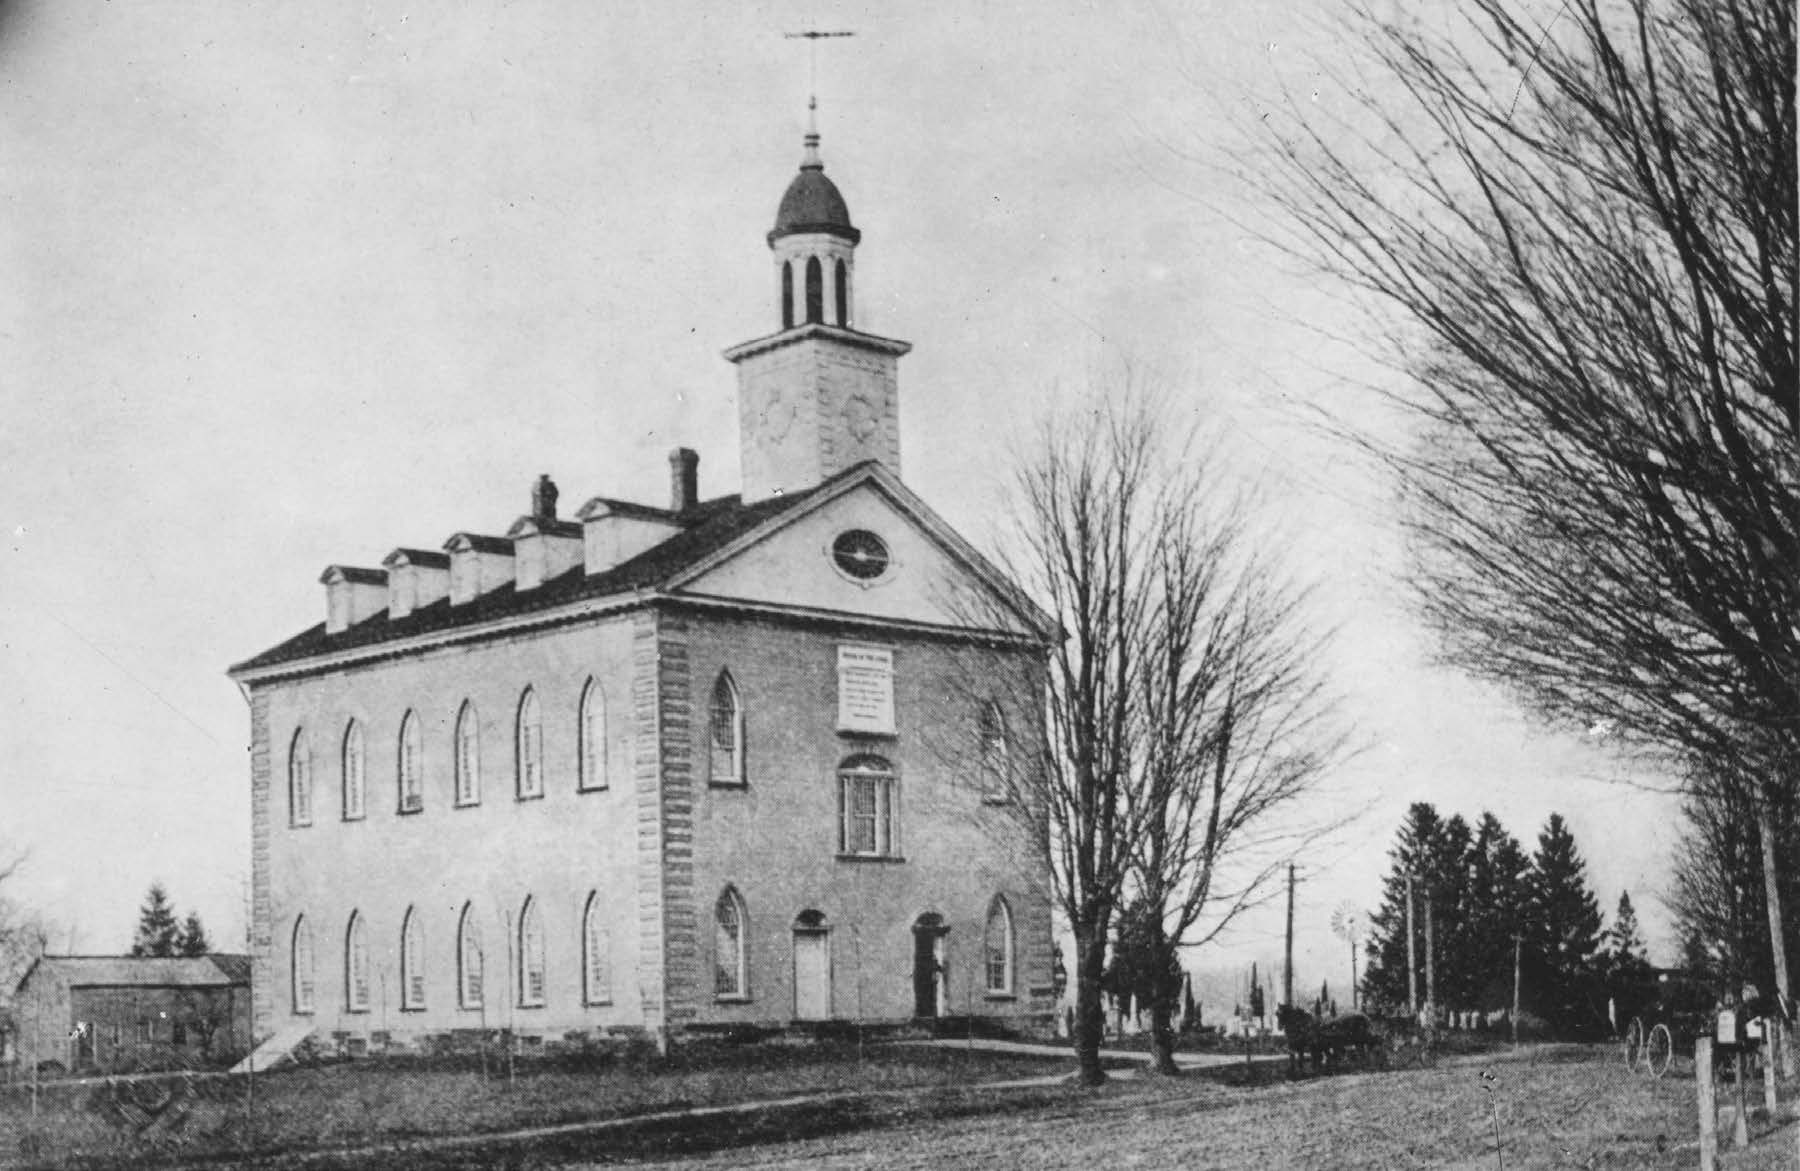 Kirtland Temple, ca. 1900. Photo by S. T. Whitaker. Temples and temple ordinances were at the heart of building Zion. Courtesy of Church History Library.